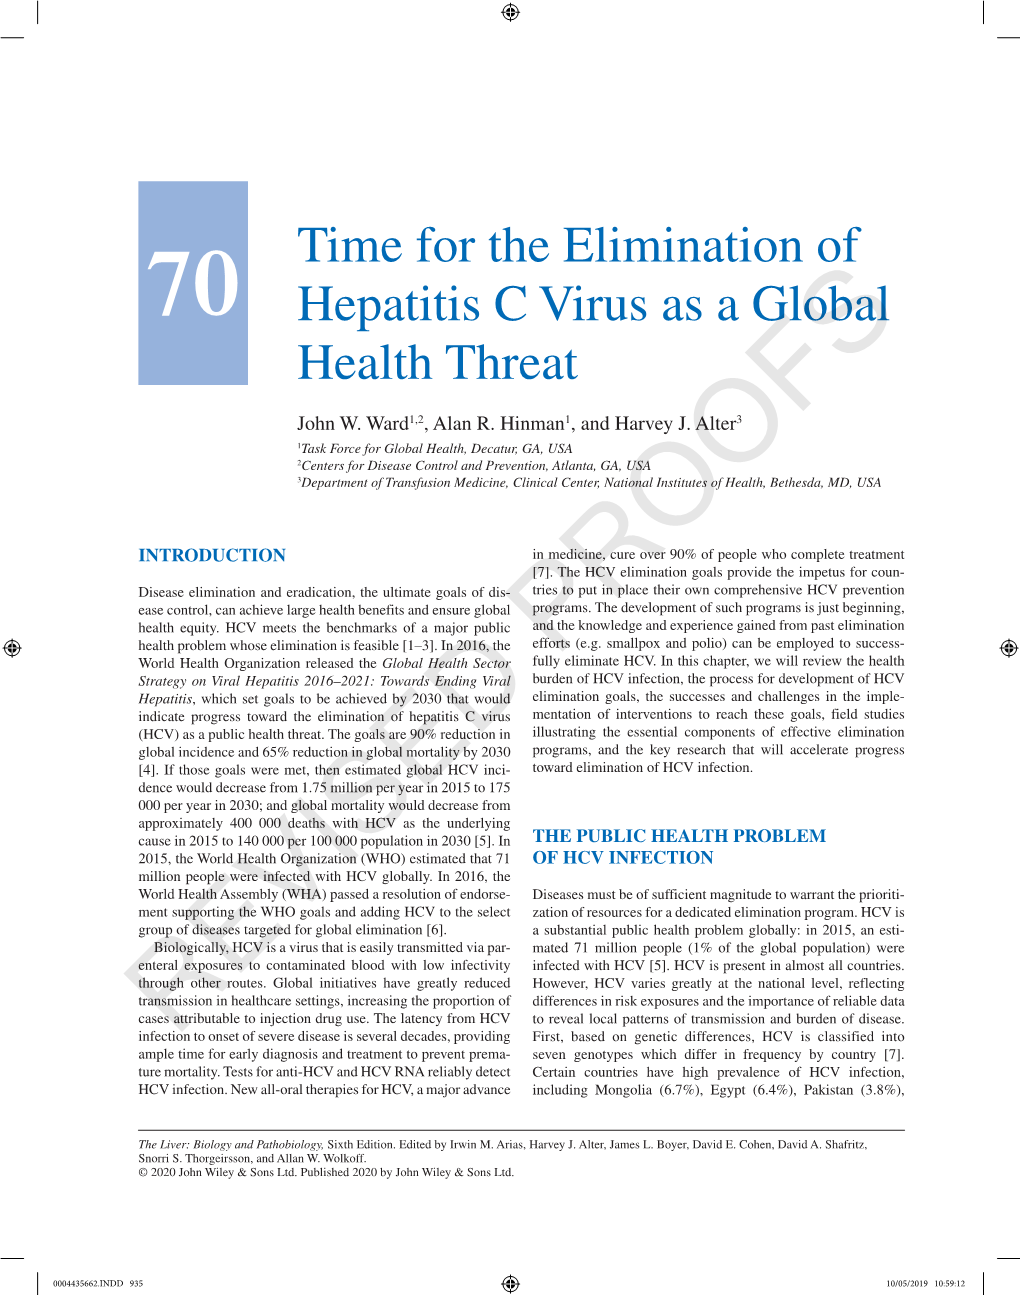 Time for the Elimination of Hepatitis C Virus As a Global Health Threat 937